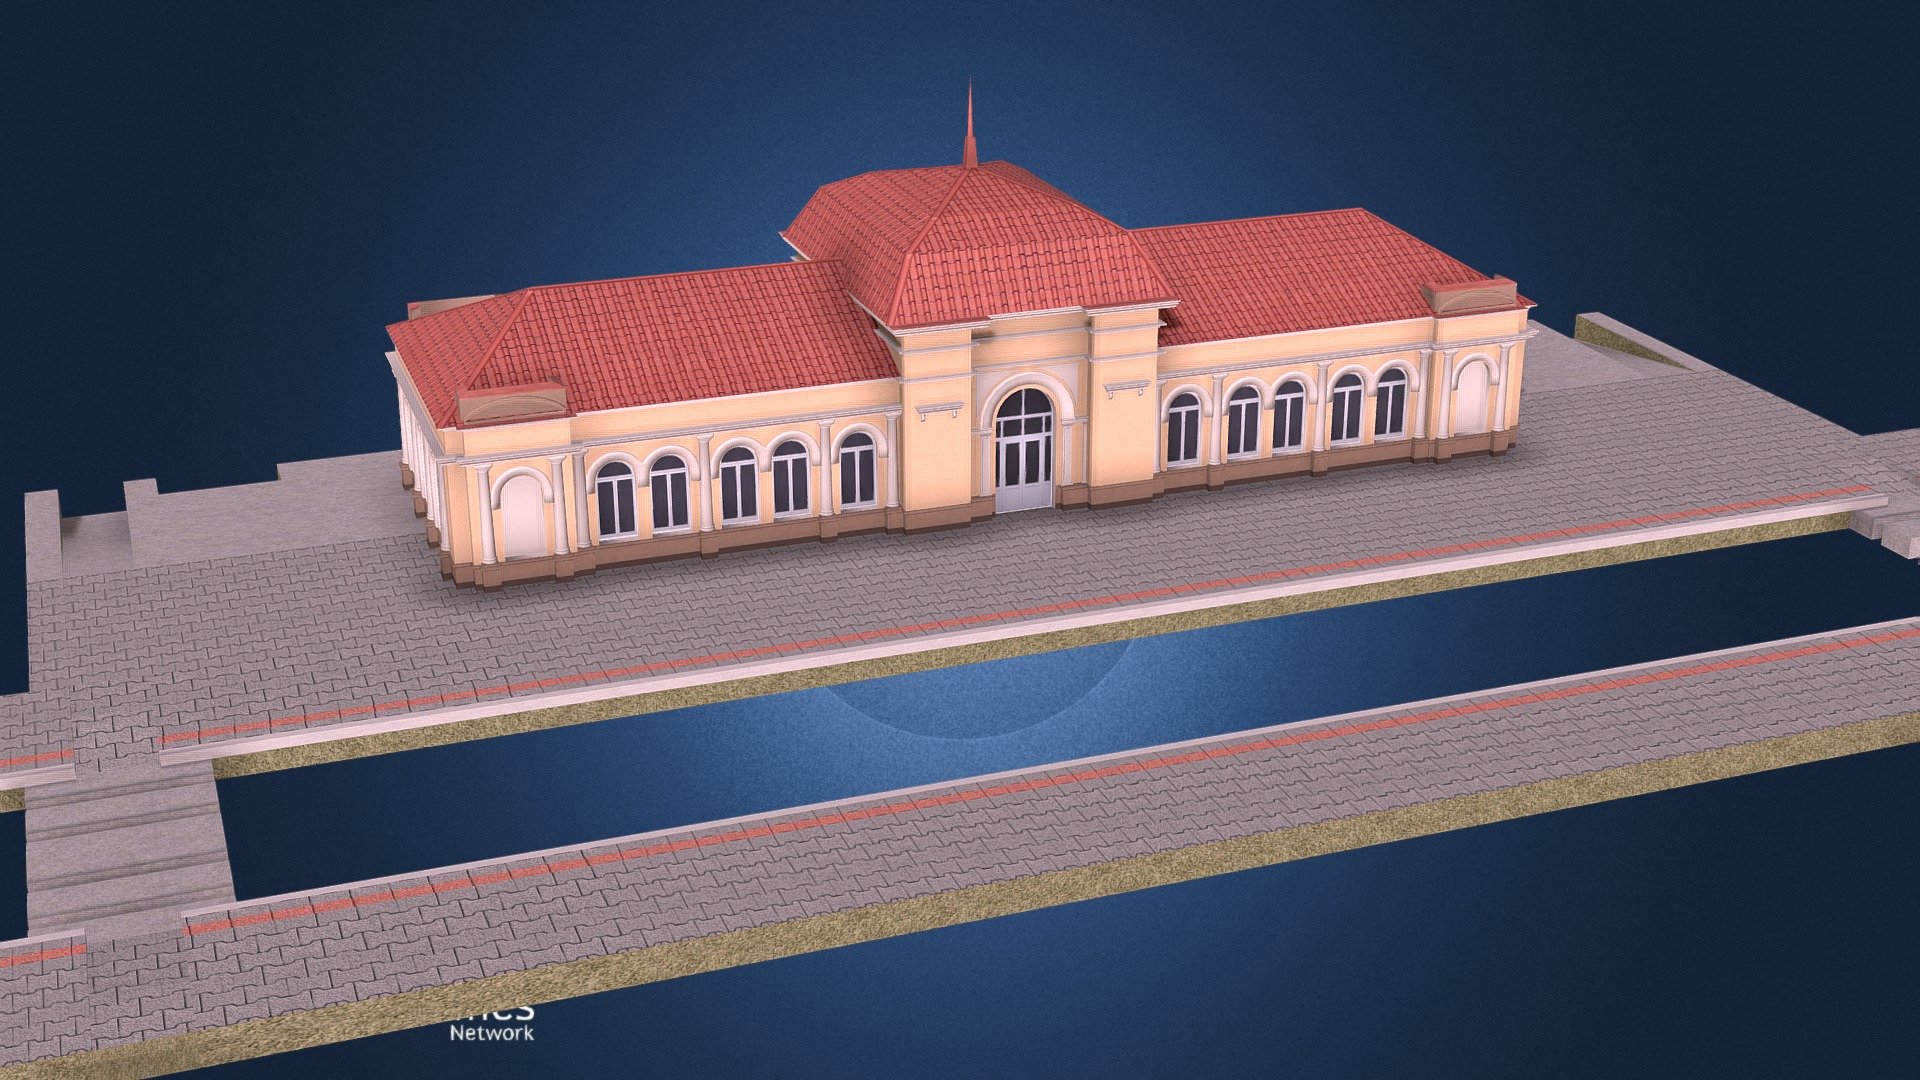 Asset for Citites Skylines.

A small railway station is made on the basis of the Children's Railway station in Globa Park (Dnepr, Ukraine).
The building of this station was built in 1936.
 - Dnepr Train Station CRW - 3D model by targa (@targettius) 3d model